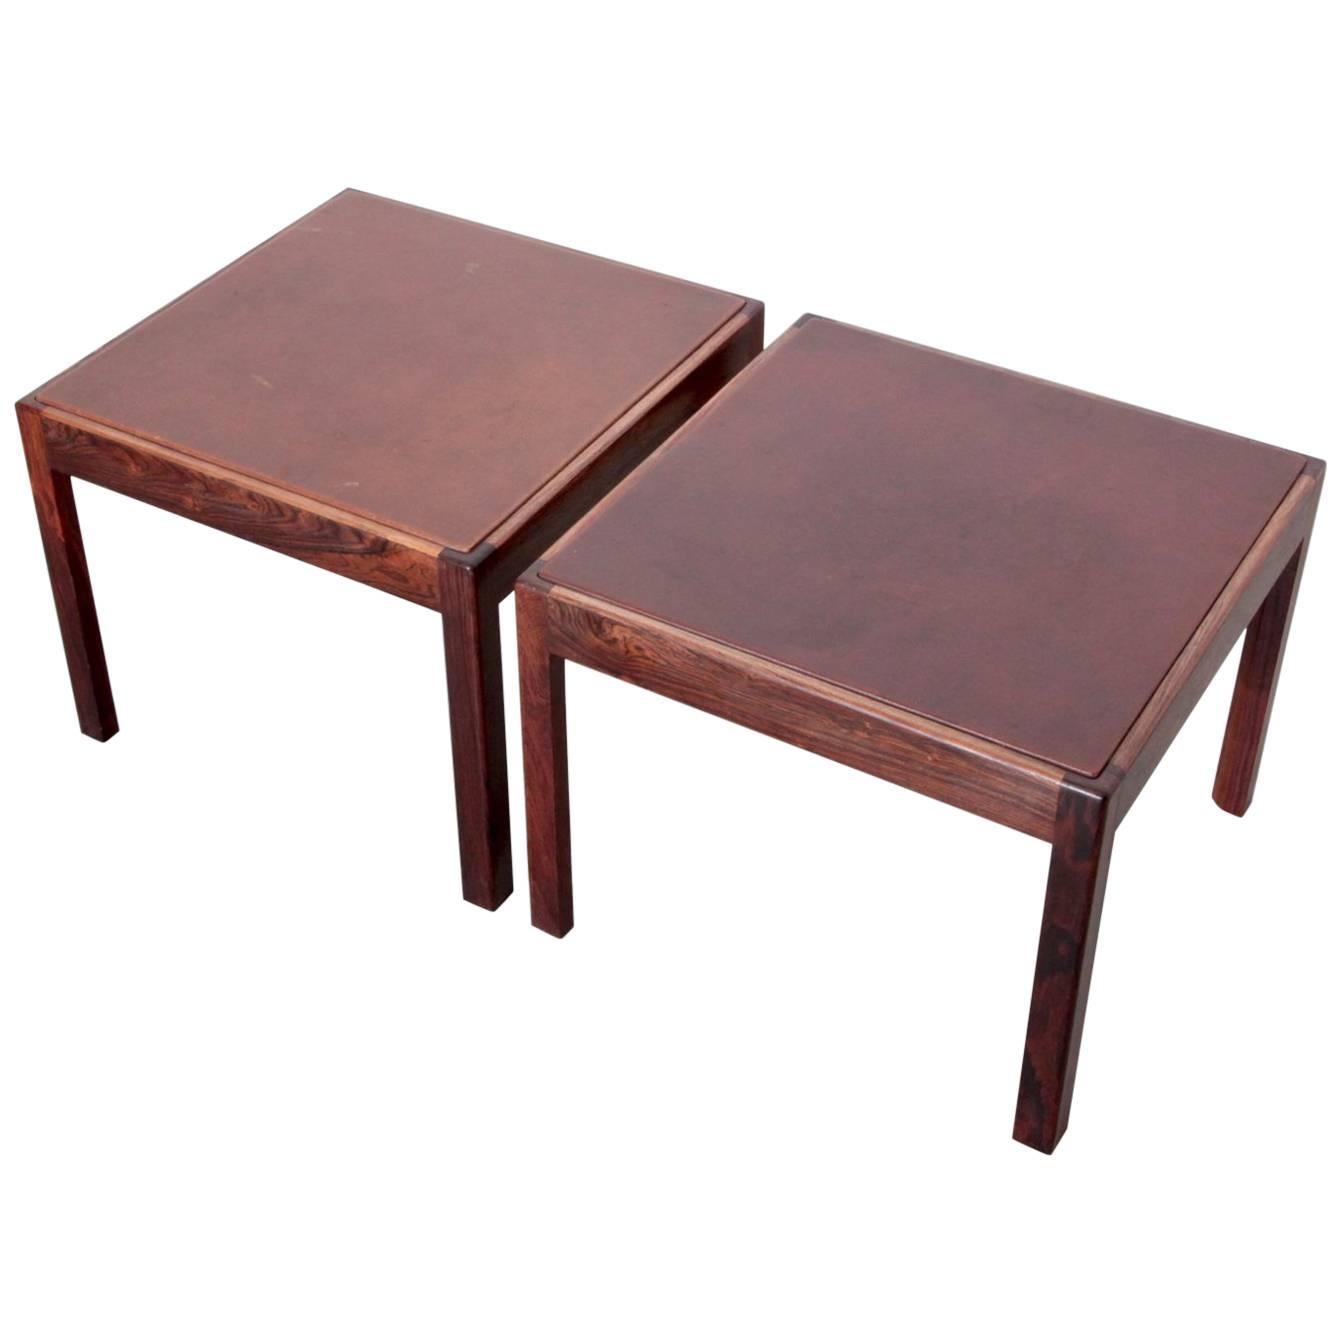 Pair of Danish Rosewood Side Tables with Leather Top